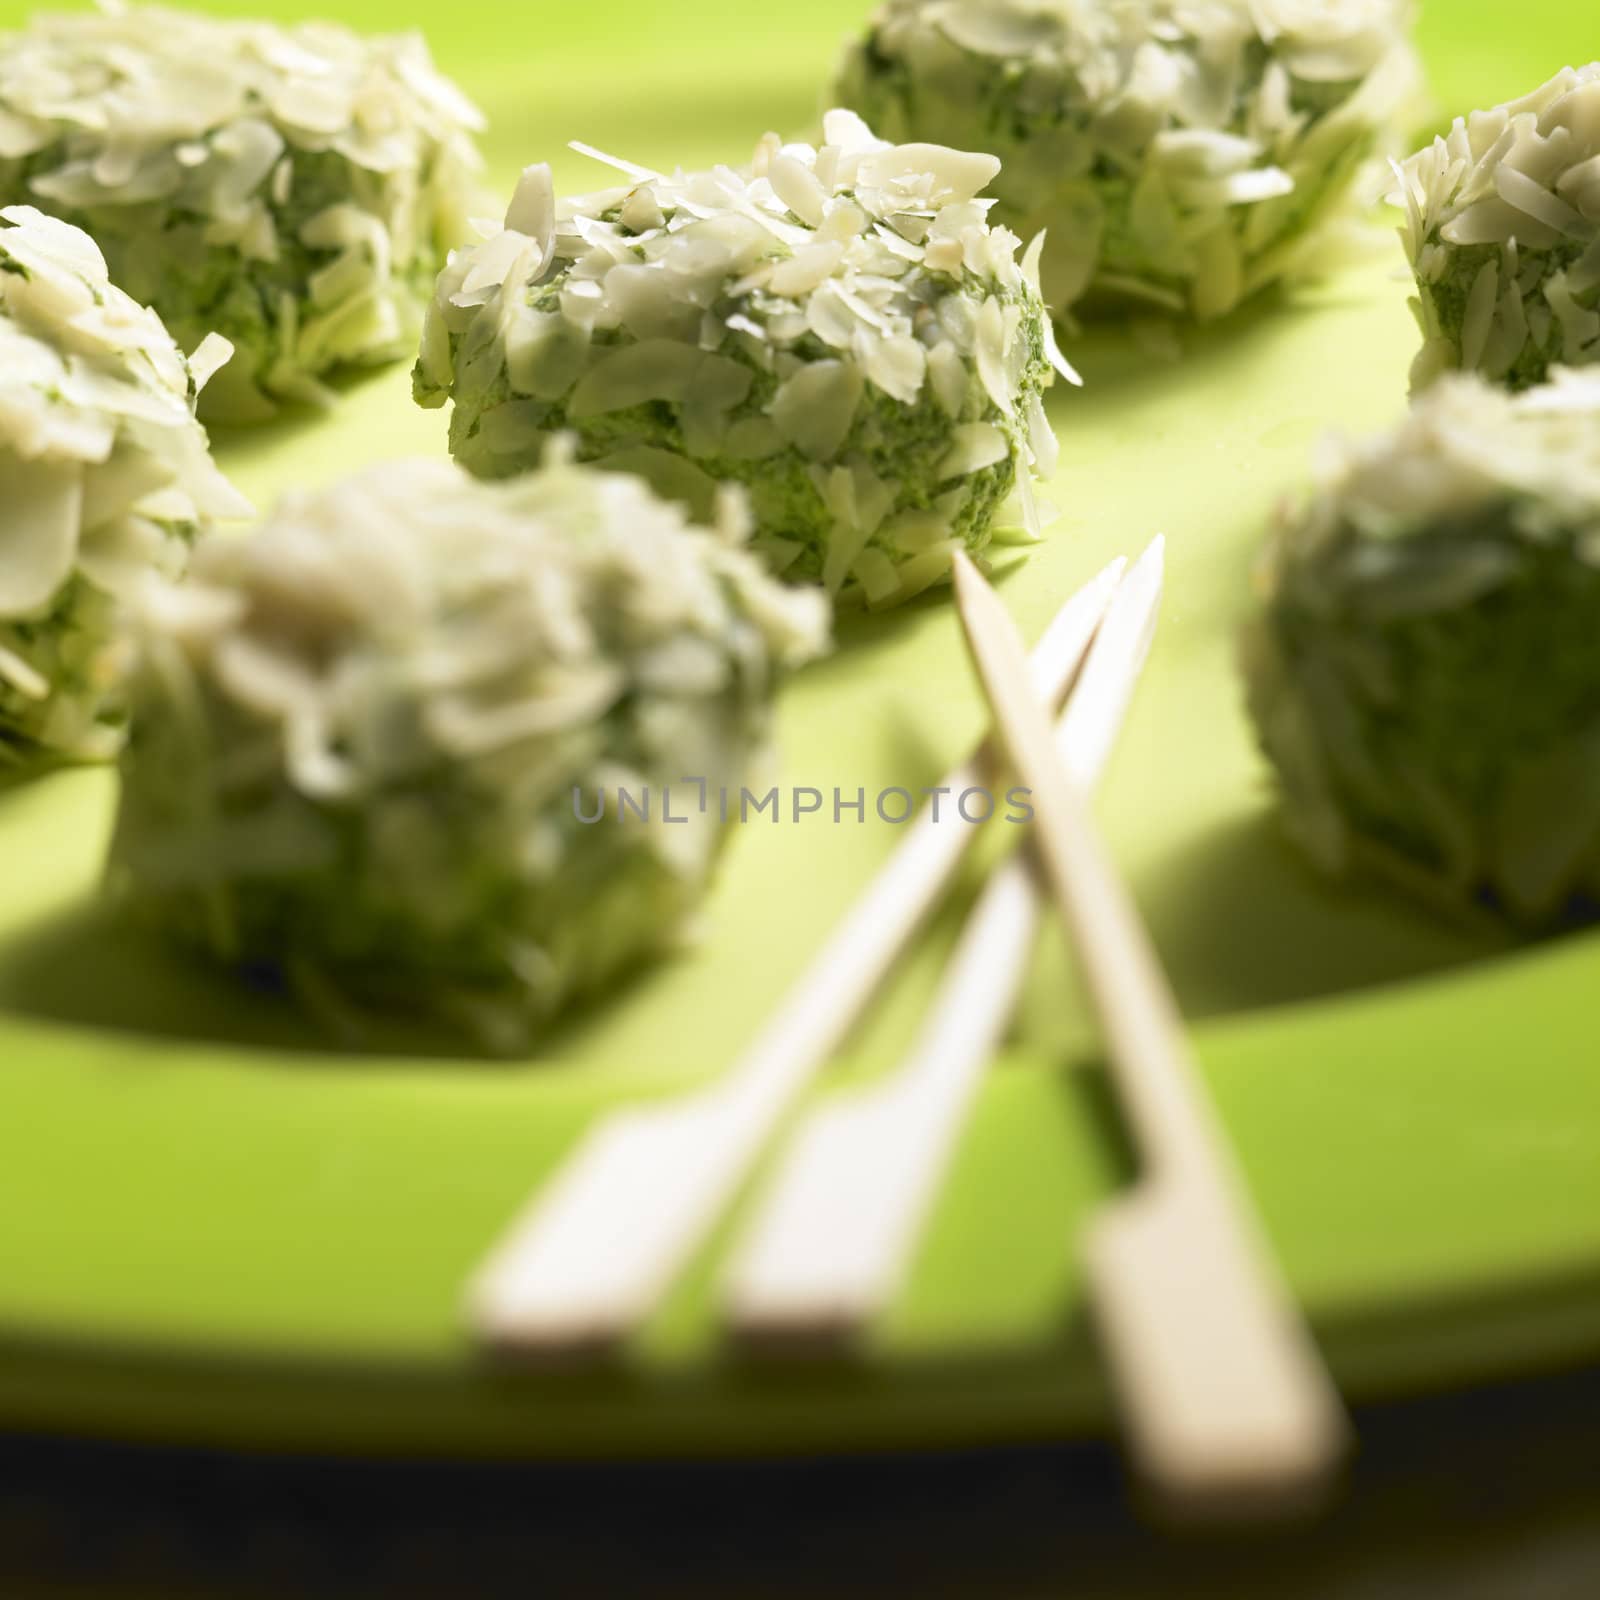 cold spinach balls by phbcz